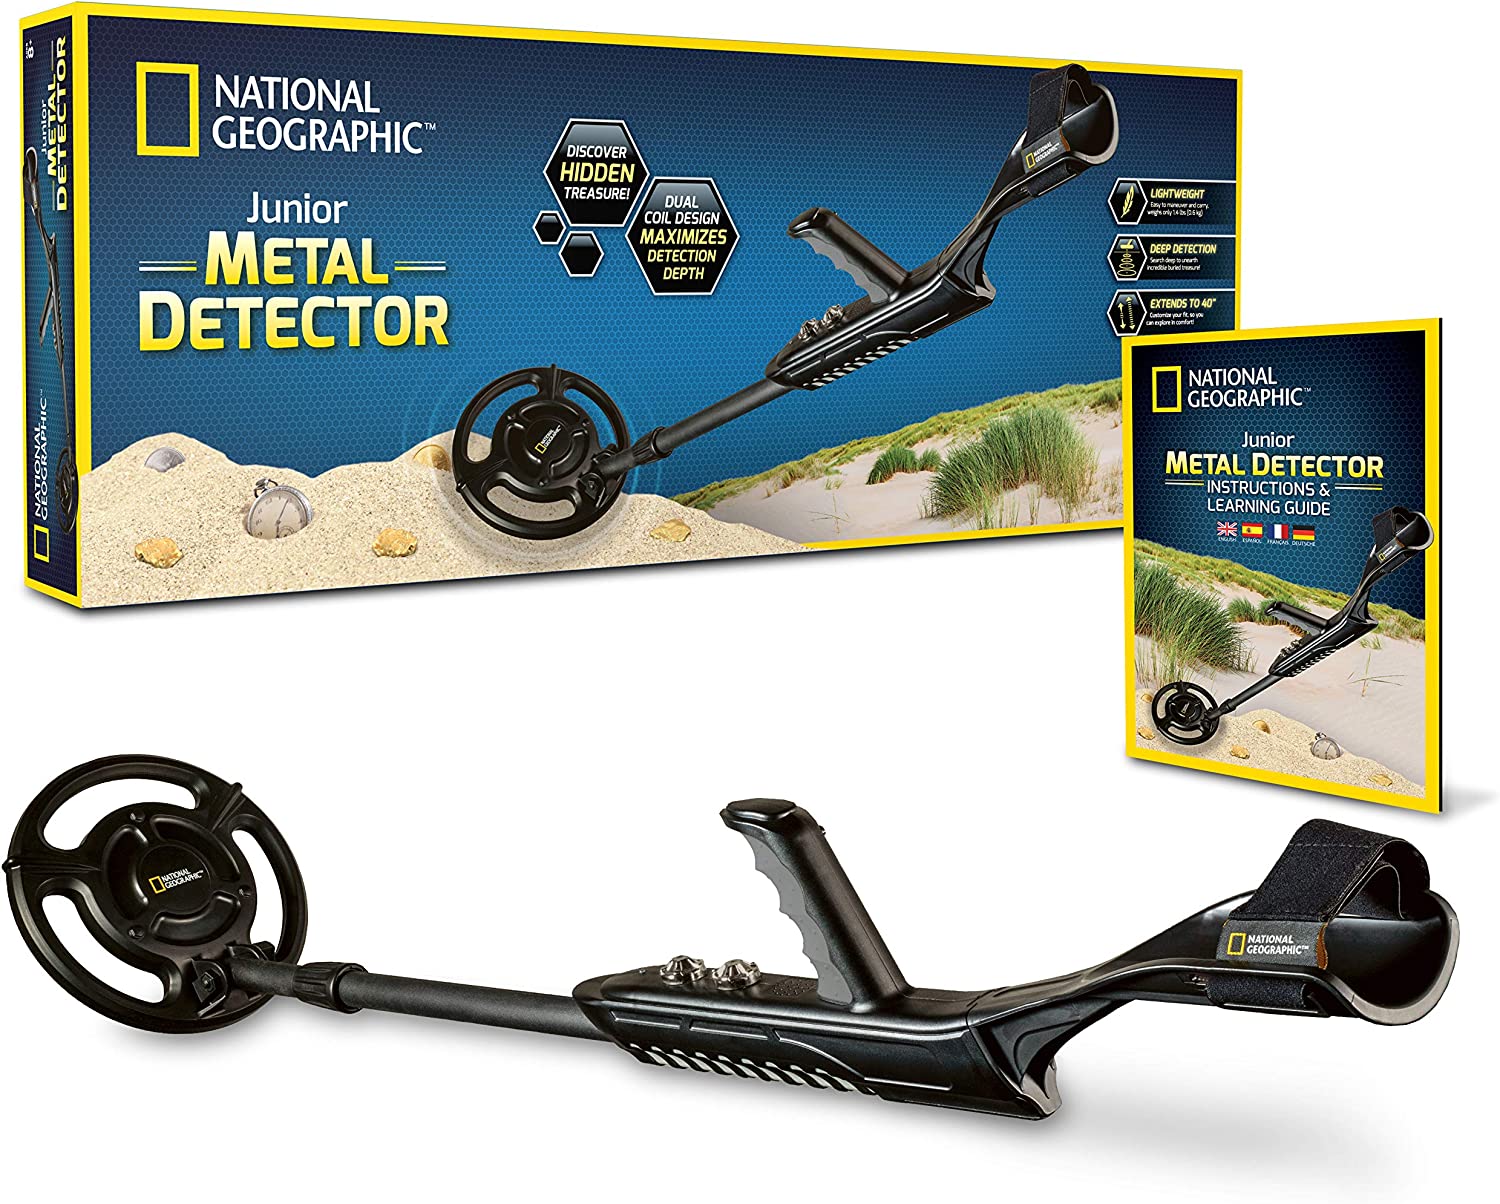 National Geographic metal detector with box and manual